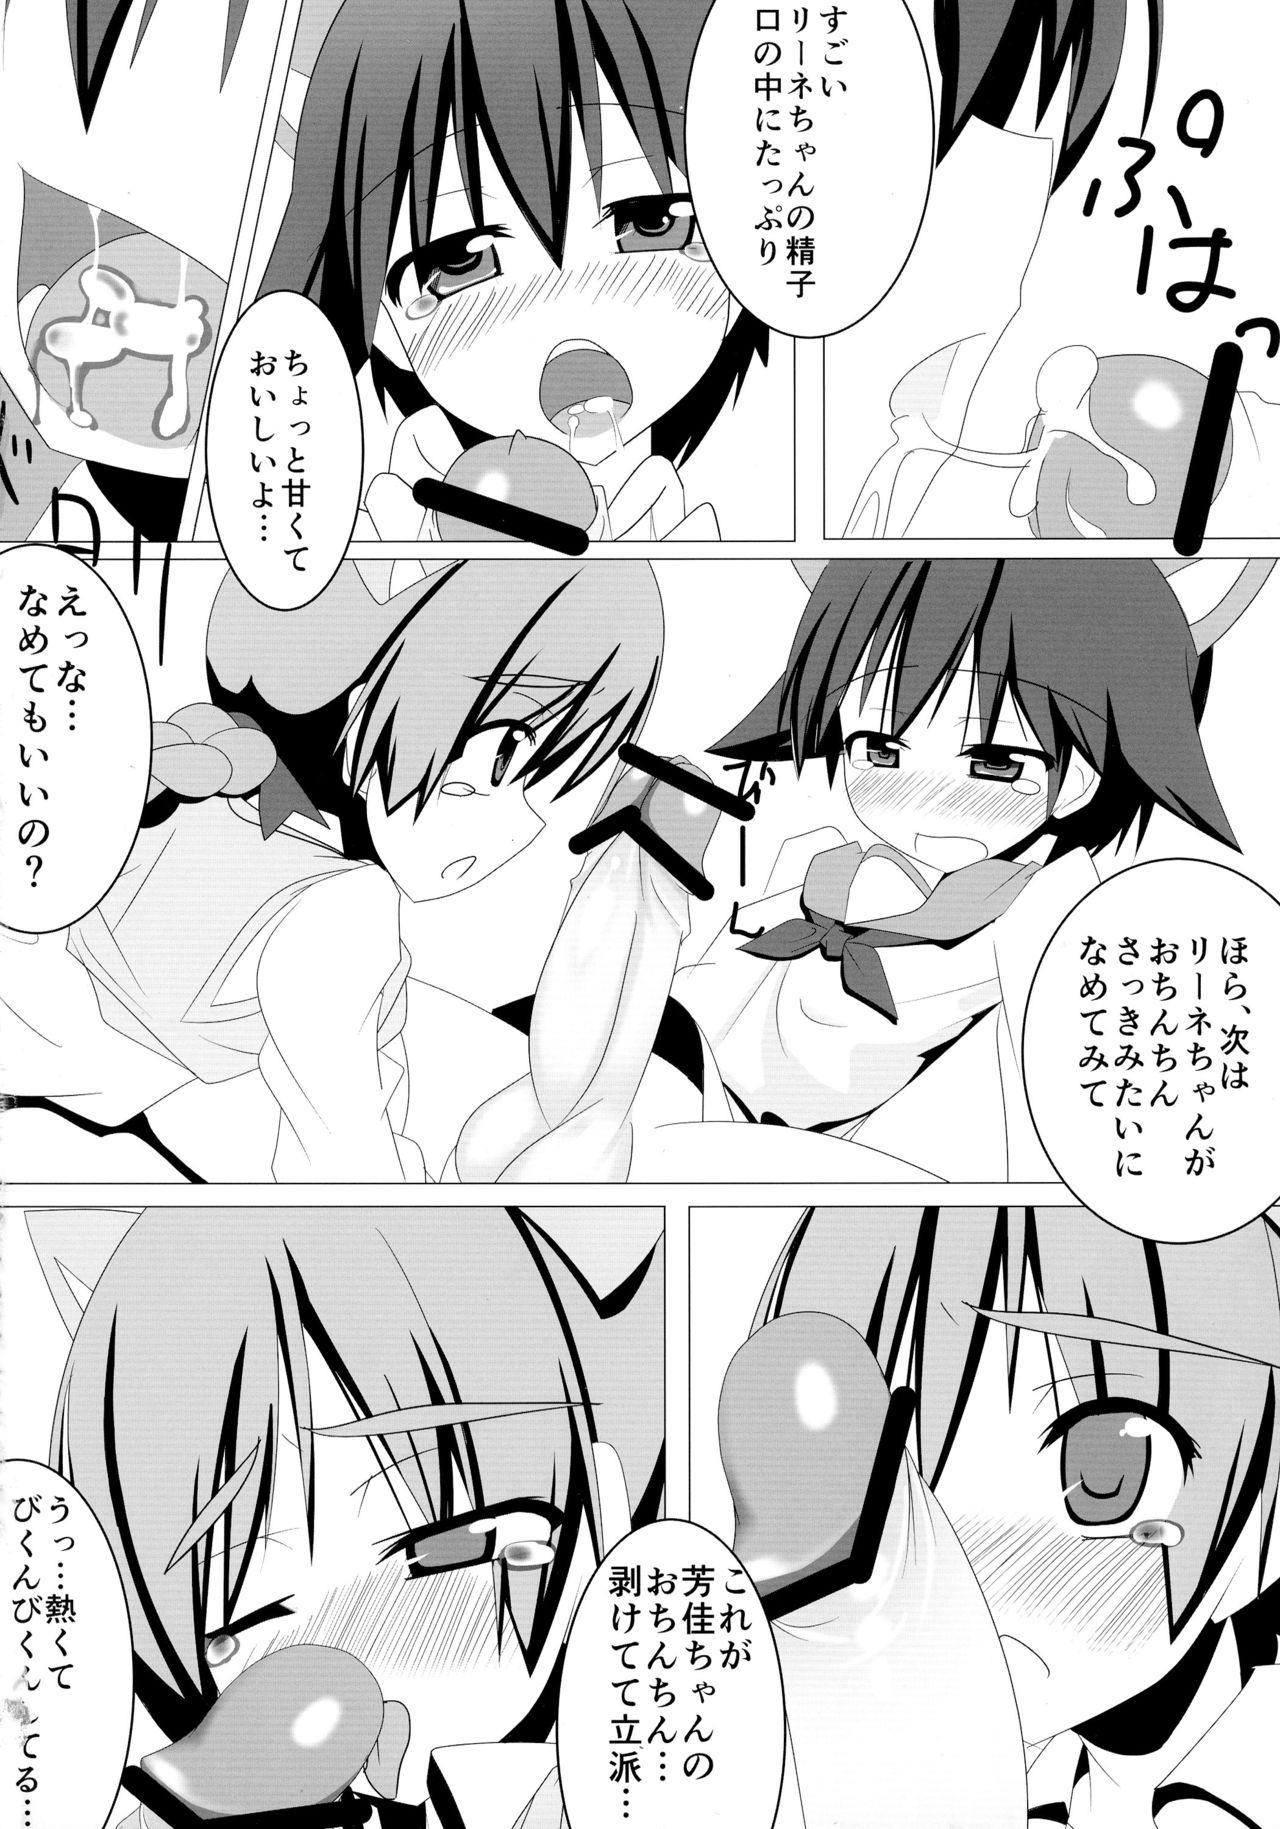 Eat Witchincraft - Strike witches Exposed - Page 10